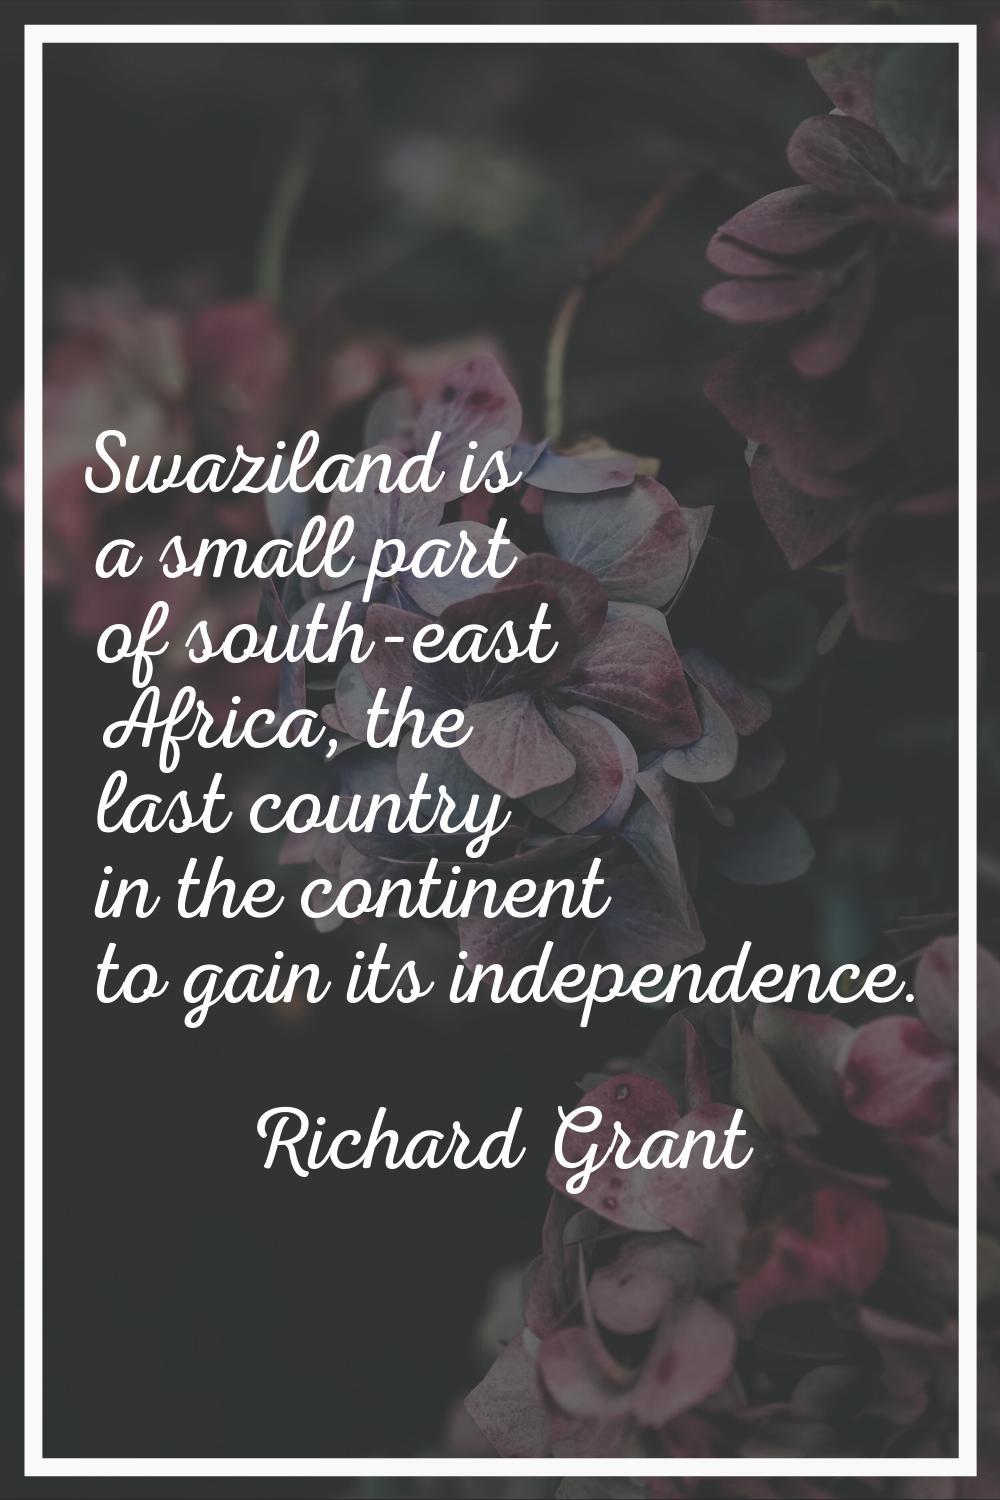 Swaziland is a small part of south-east Africa, the last country in the continent to gain its indep